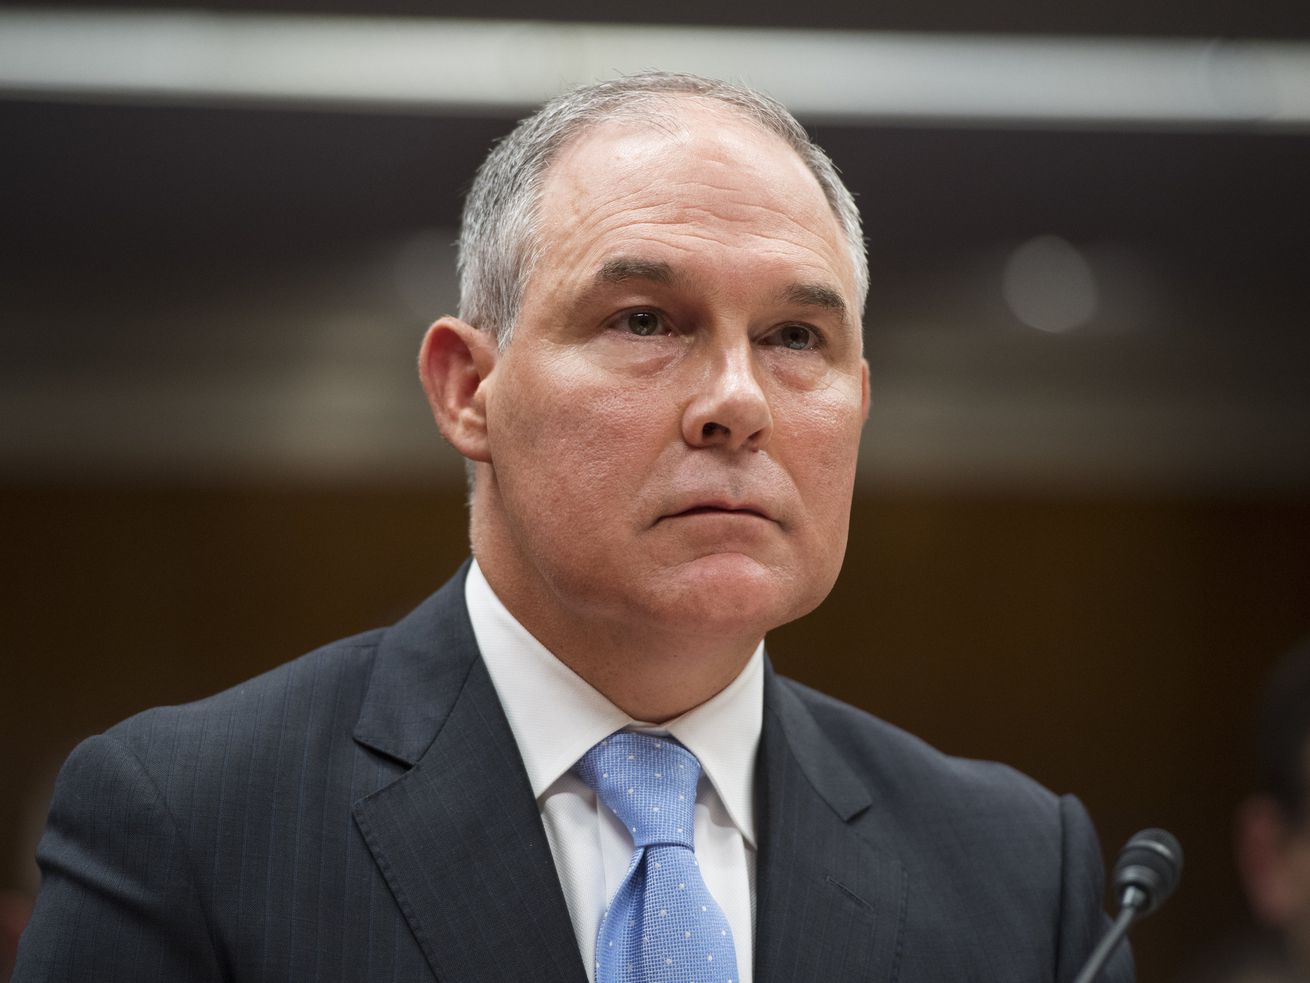 EPA Administrator Scott Pruitt resigned on July 5 after months of reports of corruption, malfeasance, and deceiving the public.